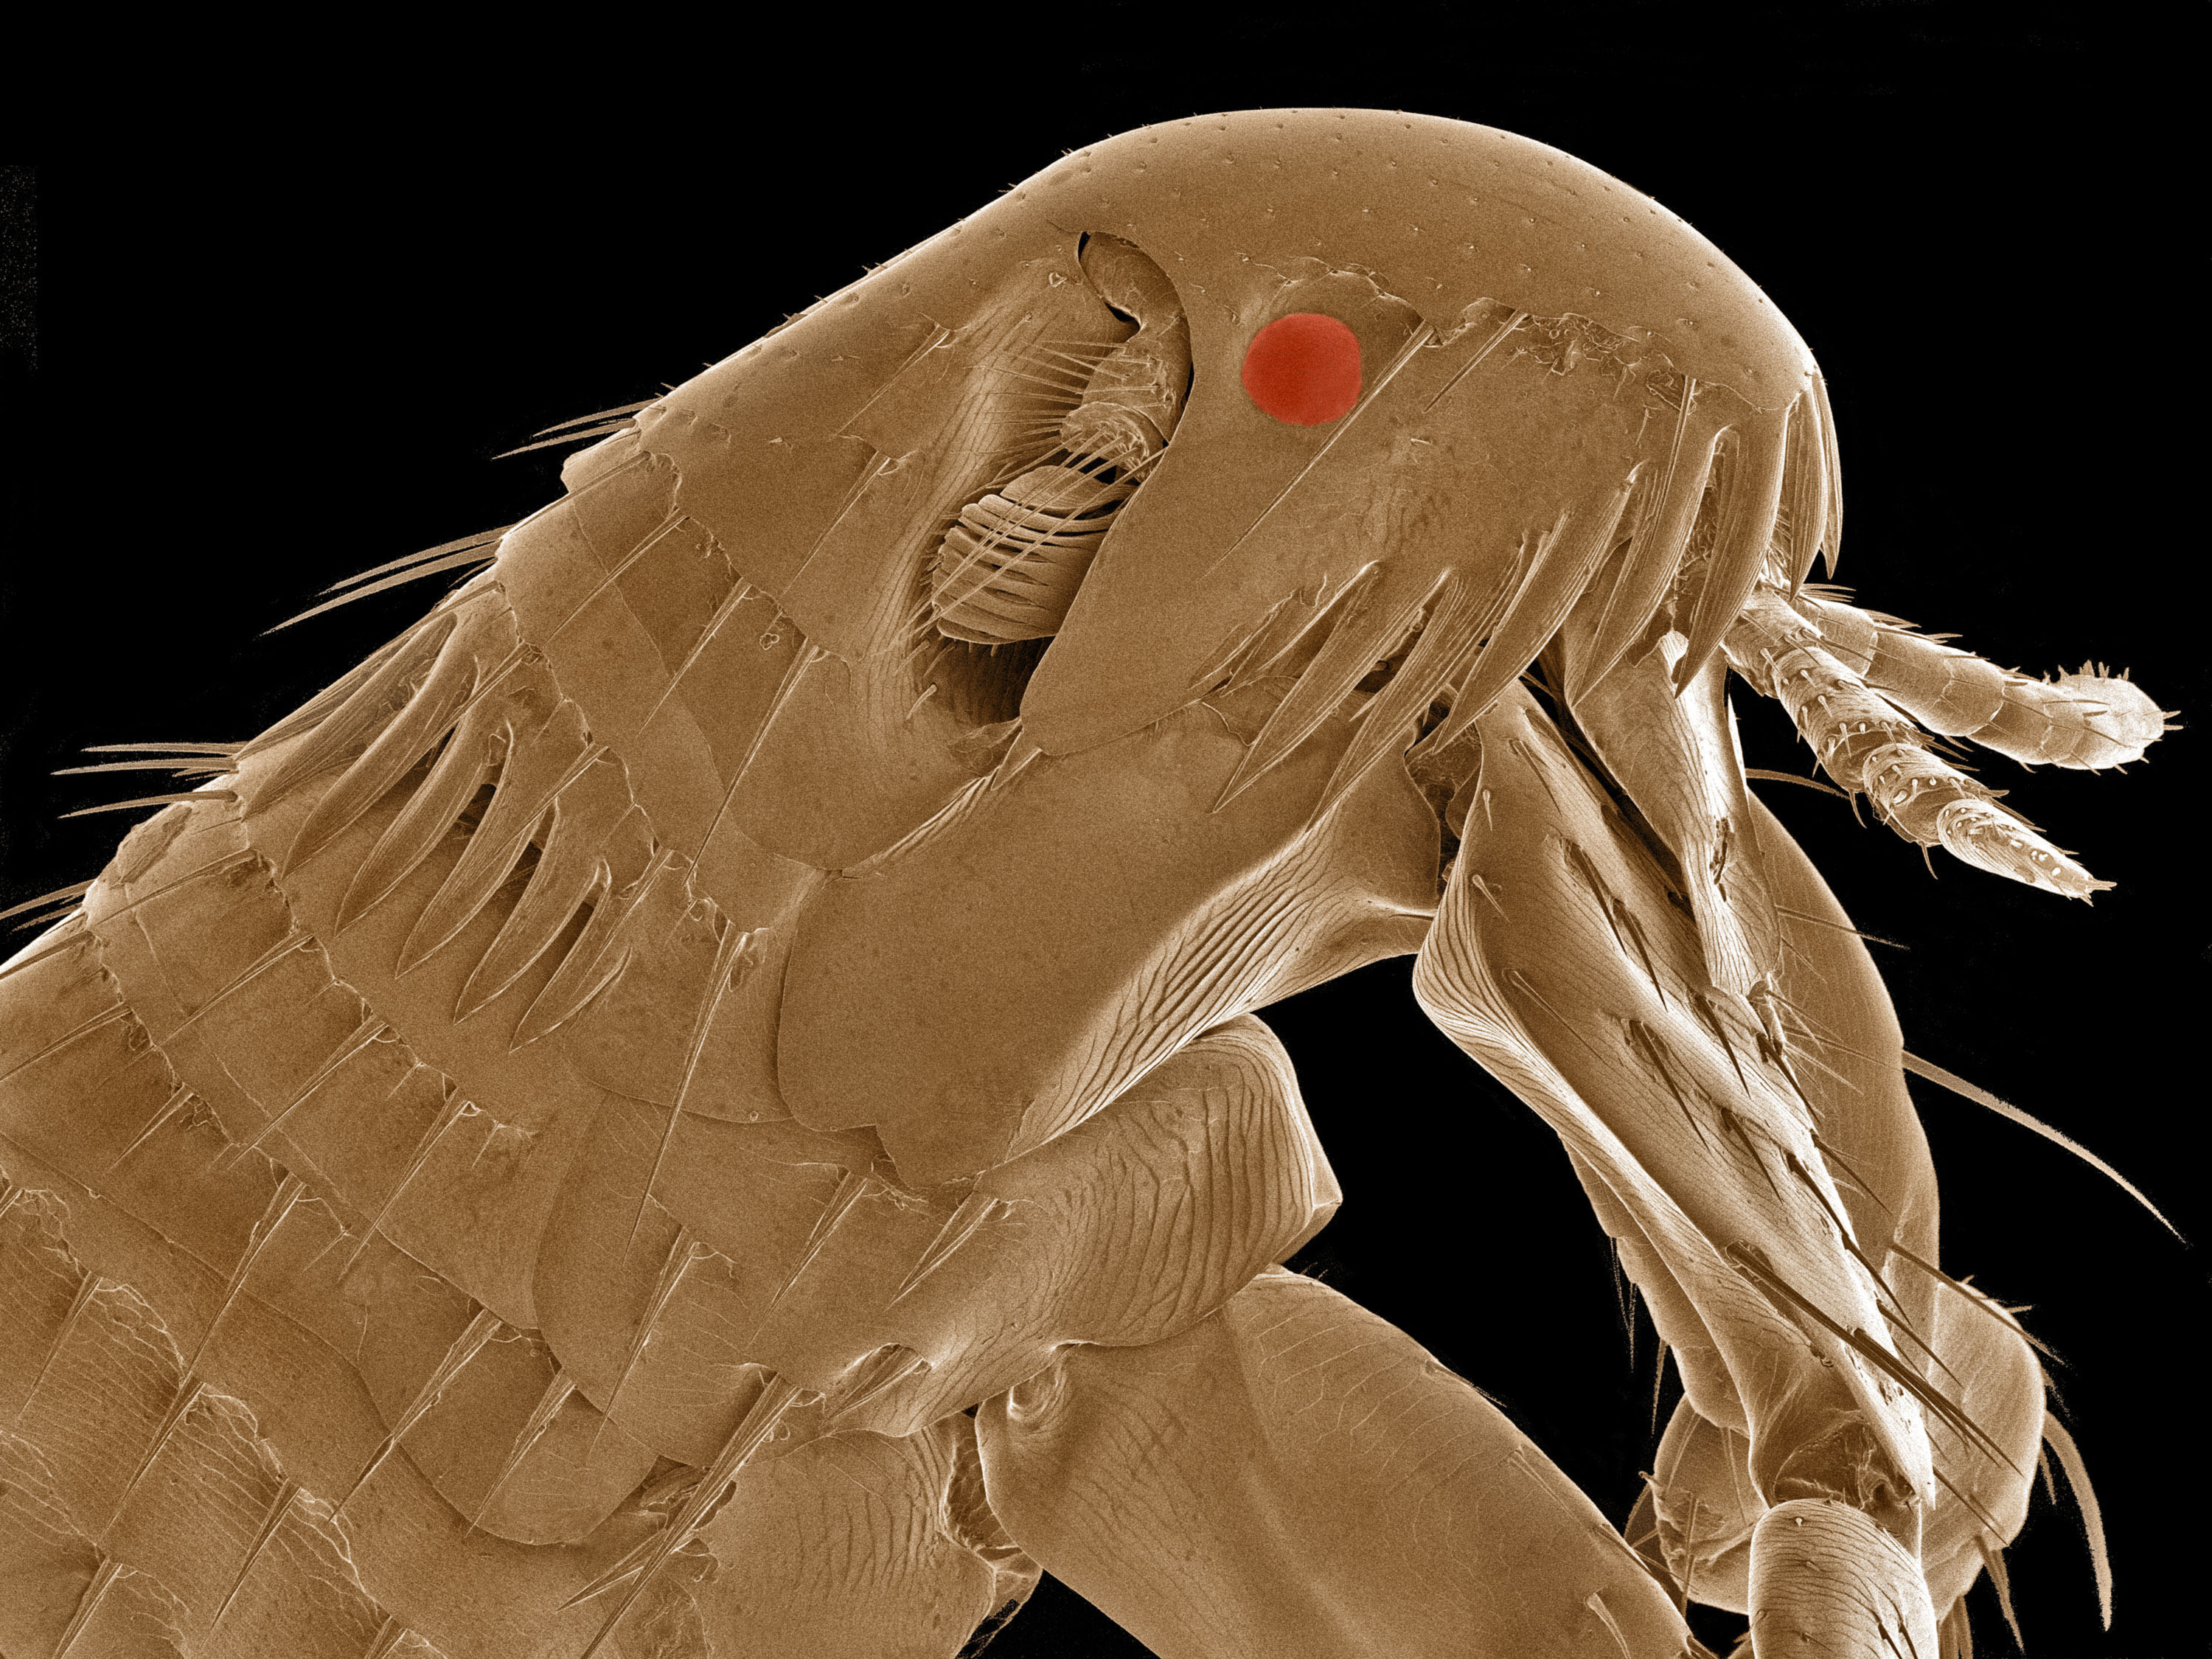 A common flea, as seen under an electron microscope. Image created by Thomas Deerinck.